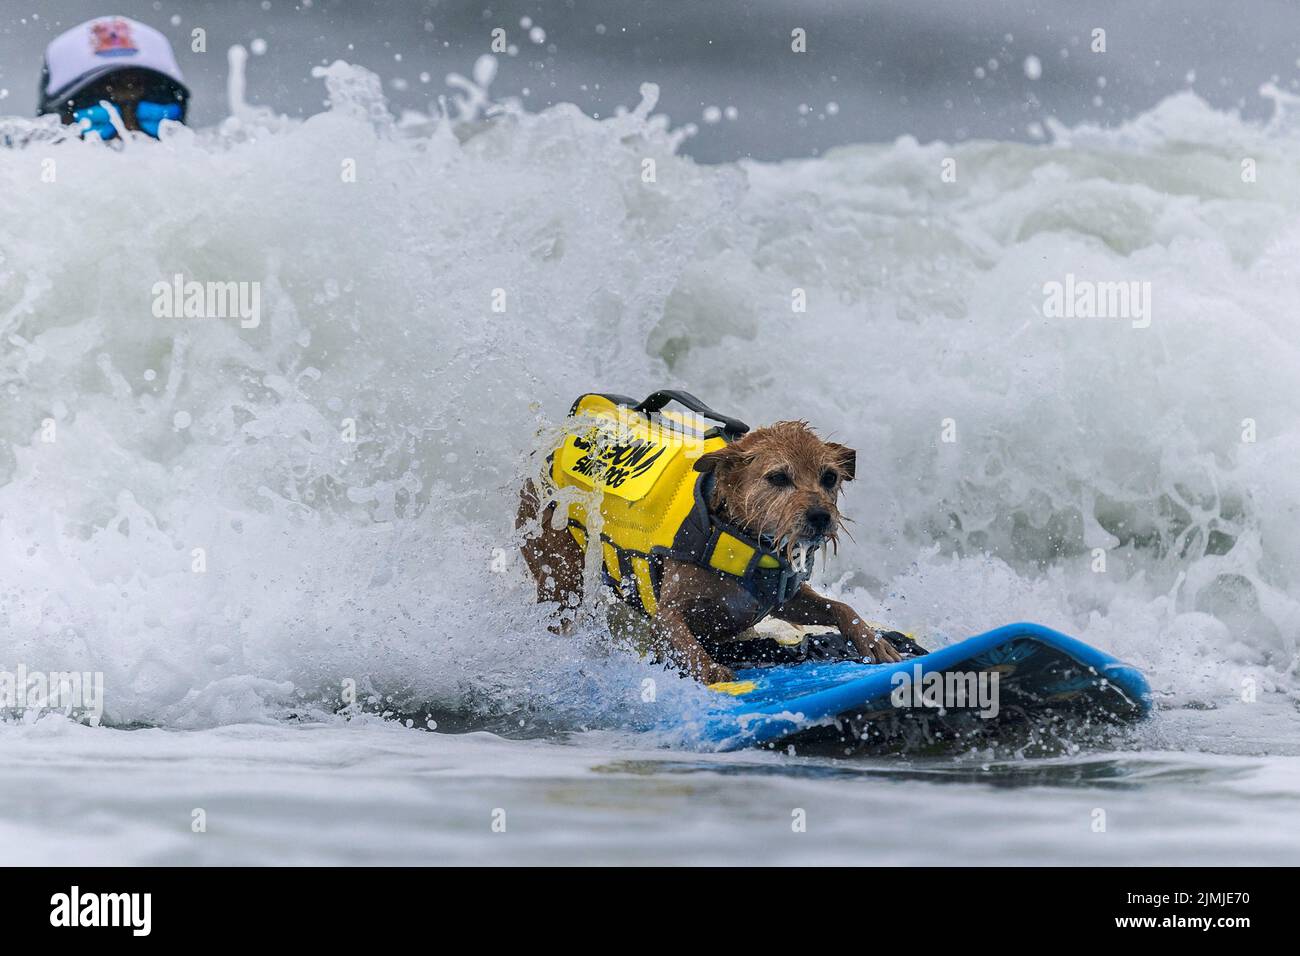 Carson competes at the World Dog Surfing Championships in Pacifica, California, U.S., August 6, 2022. REUTERS/Carlos Barria Stock Photo